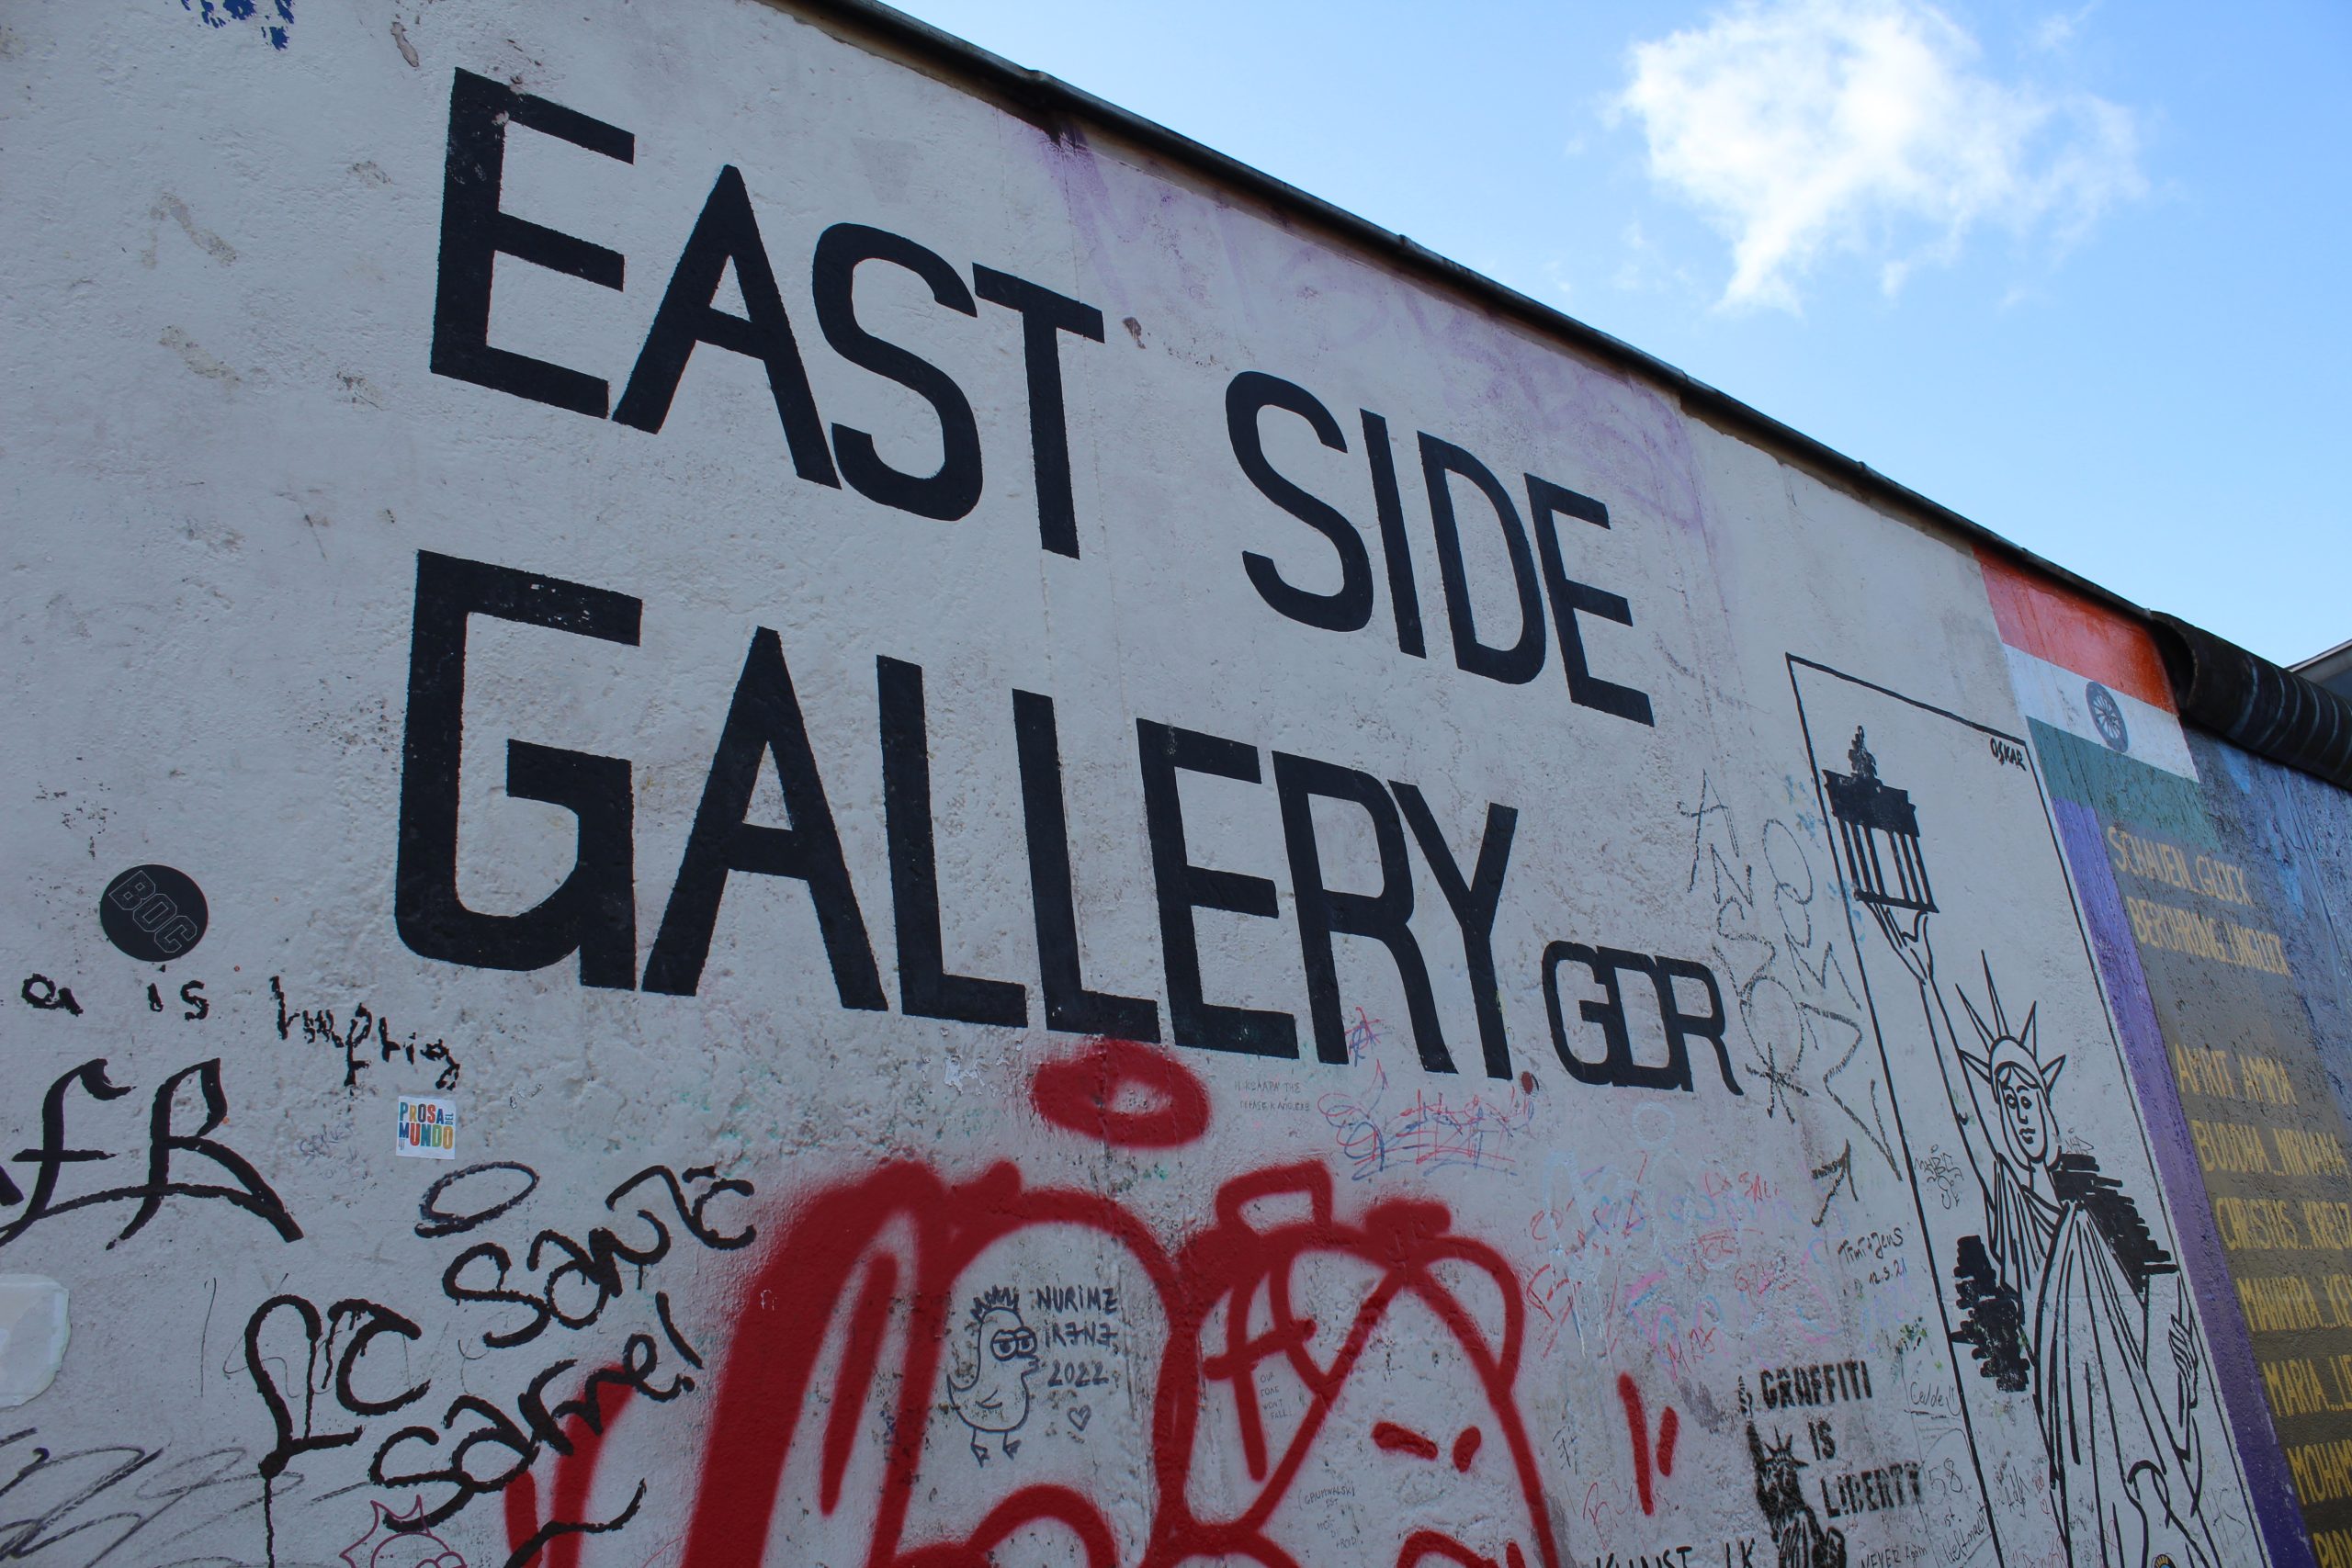 Photo of the Berlin Wall that reads "East Side Gallery" surrounded by graffiti.